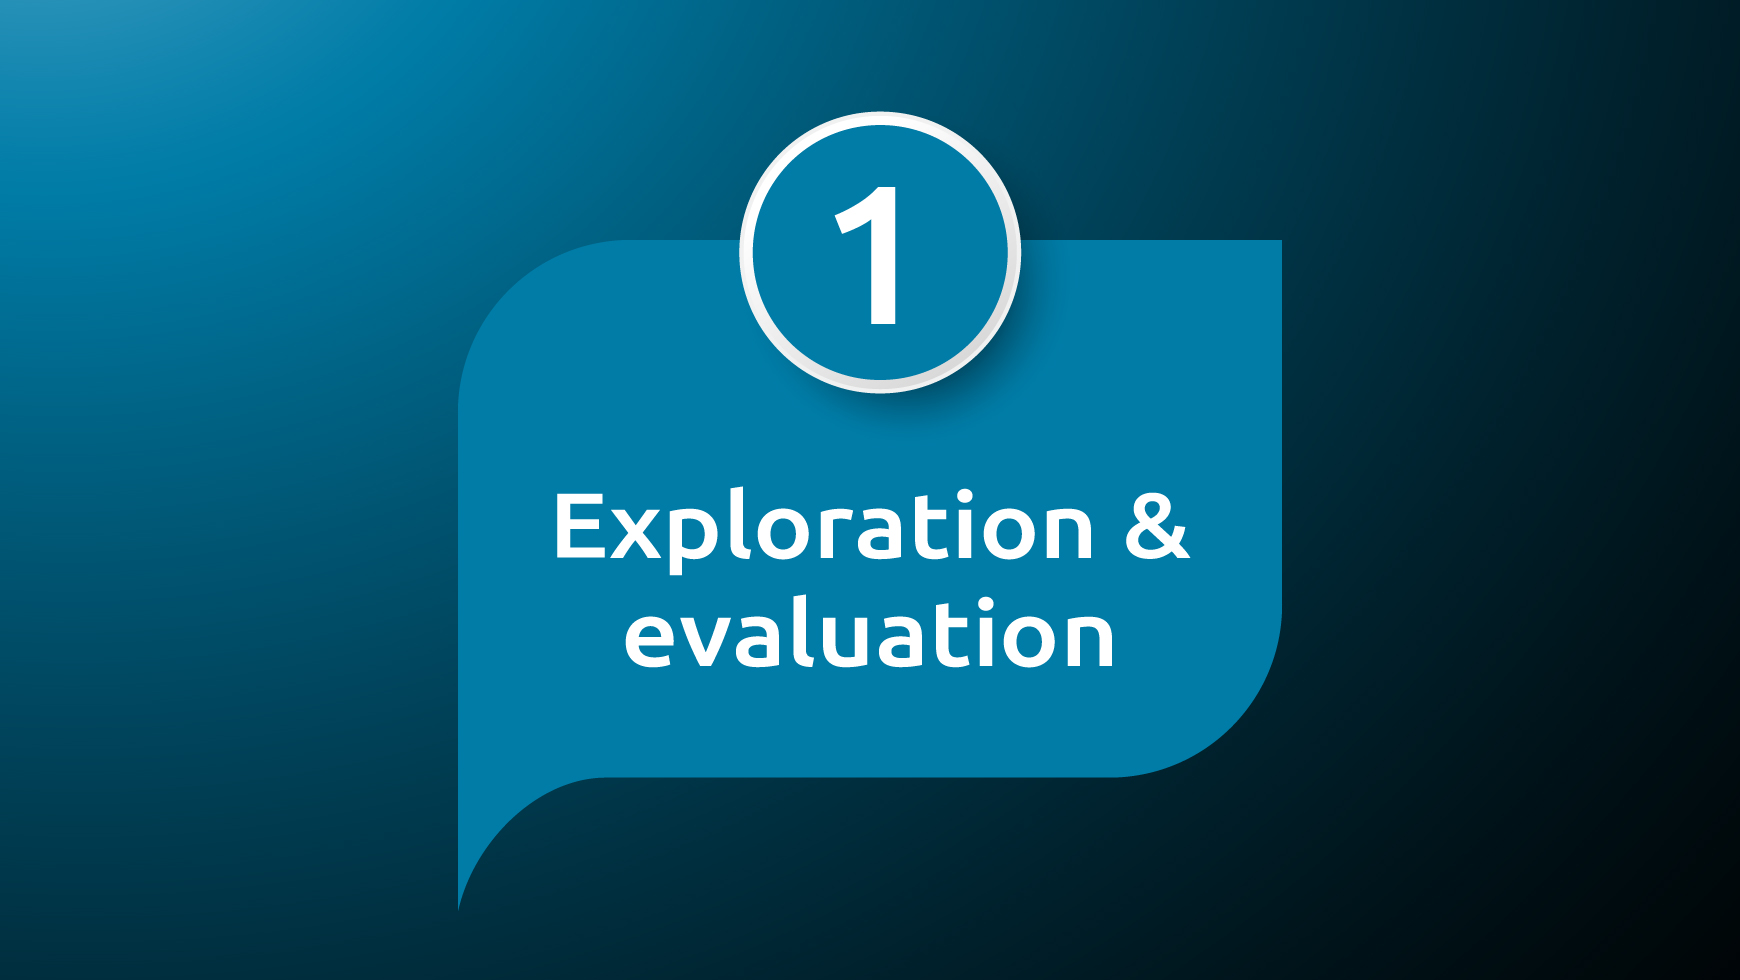 Mining life cycle stage 1 Exploration & evaluation